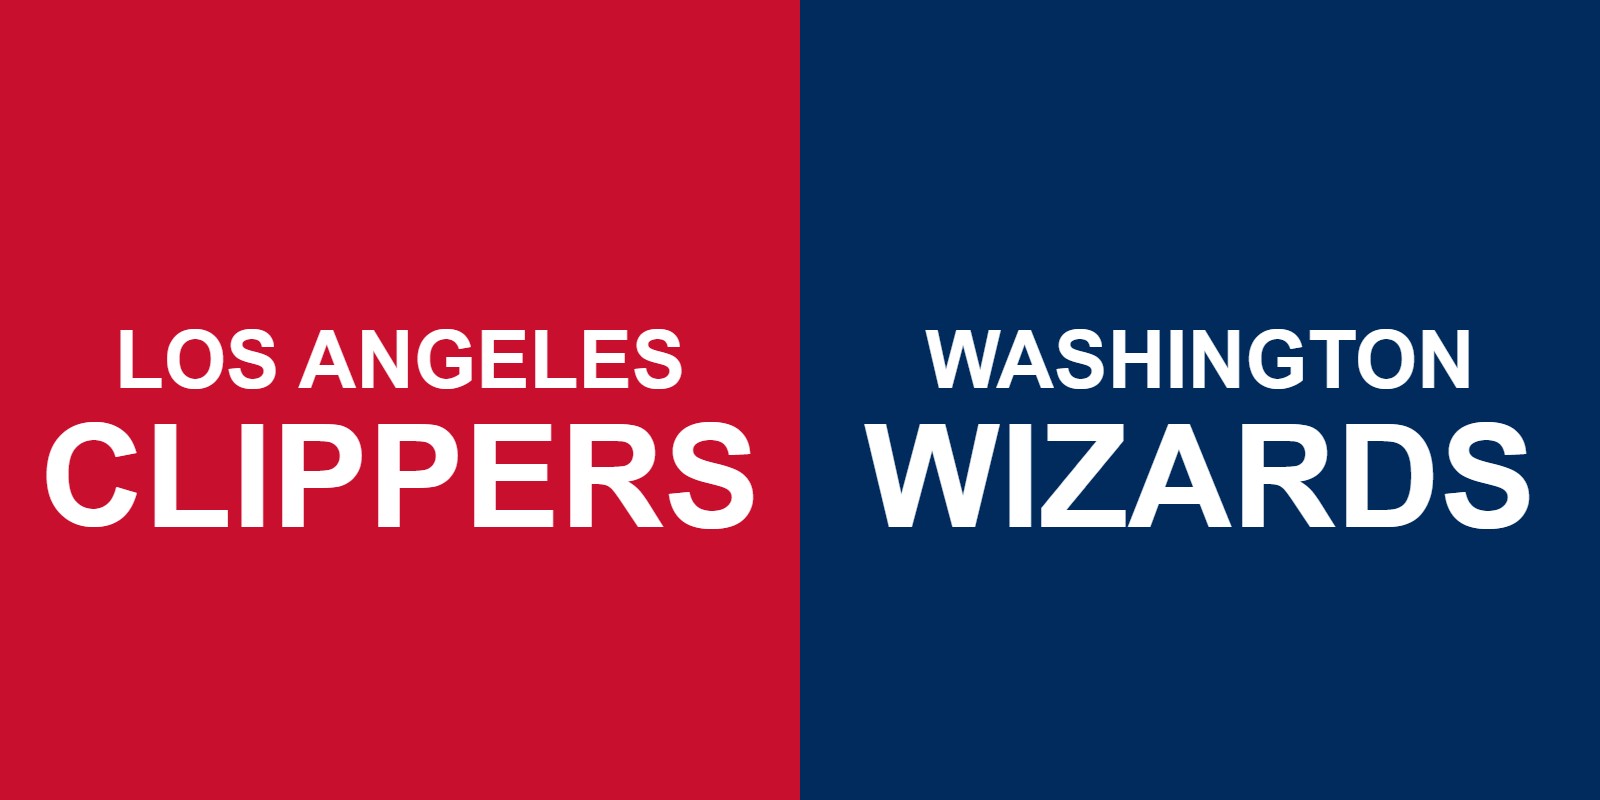 Clippers vs Wizards